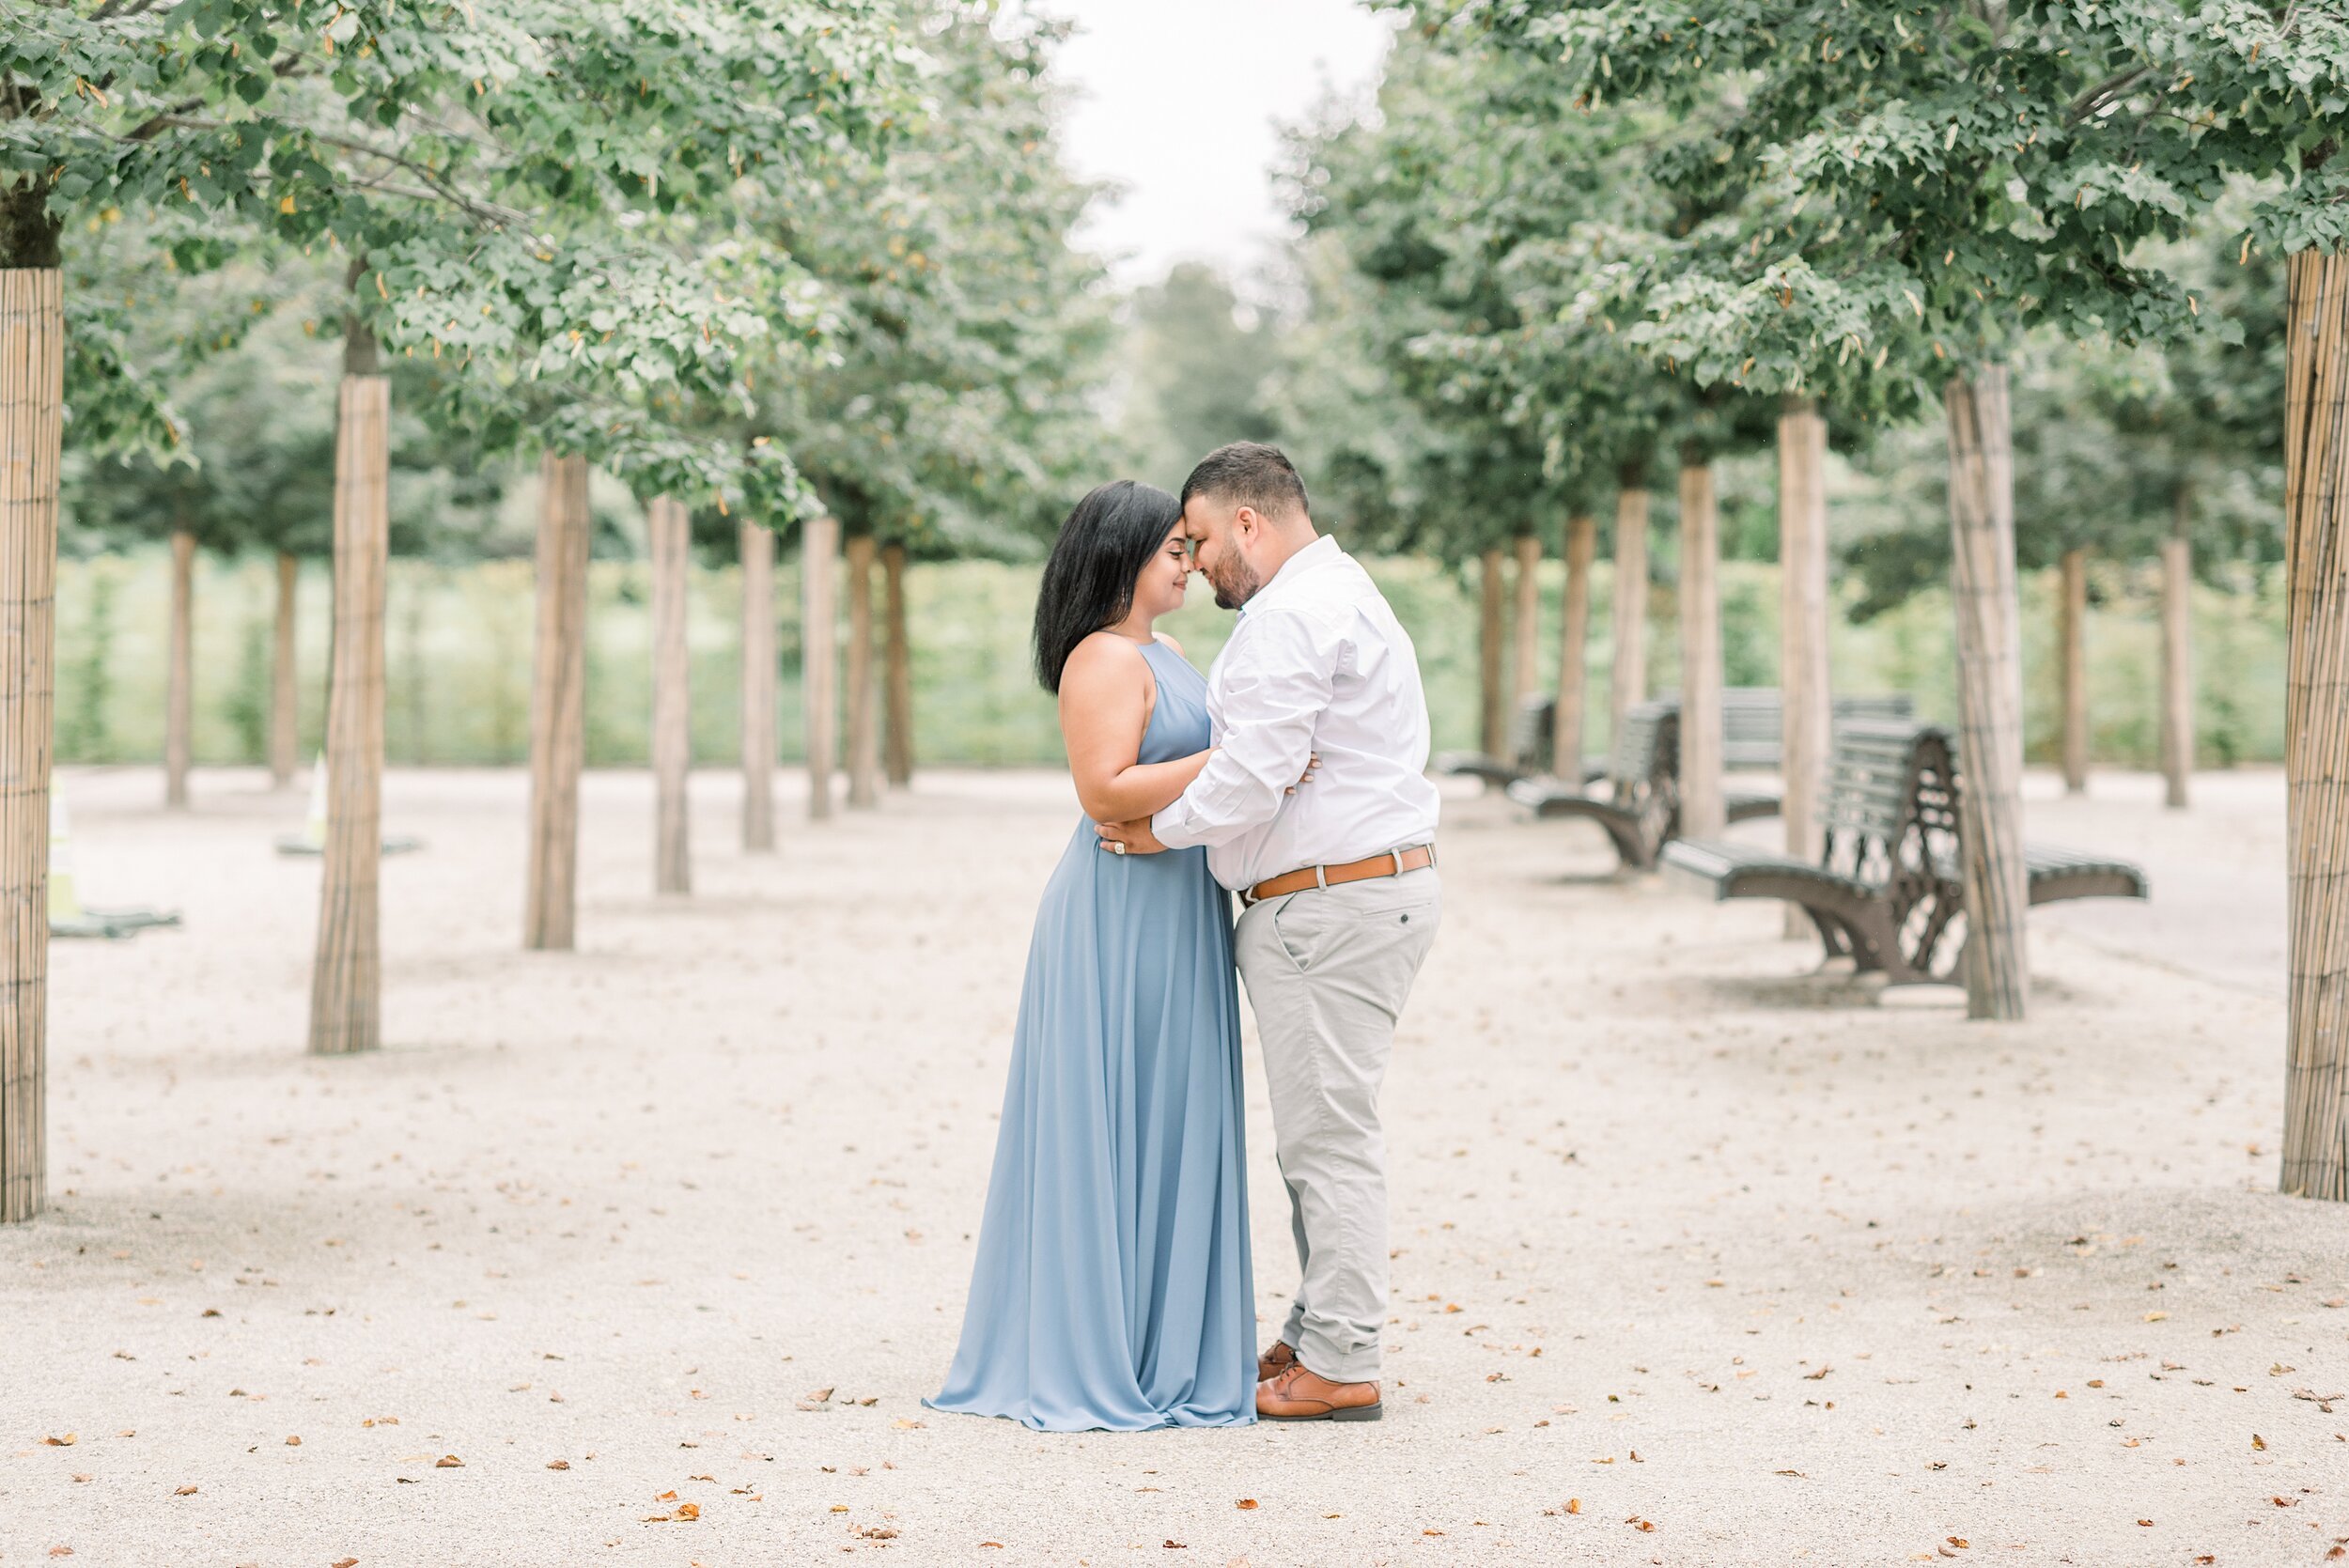 Longwood Gardens Kennet Square Pa Summer Engagement Session Photography_7653.jpg